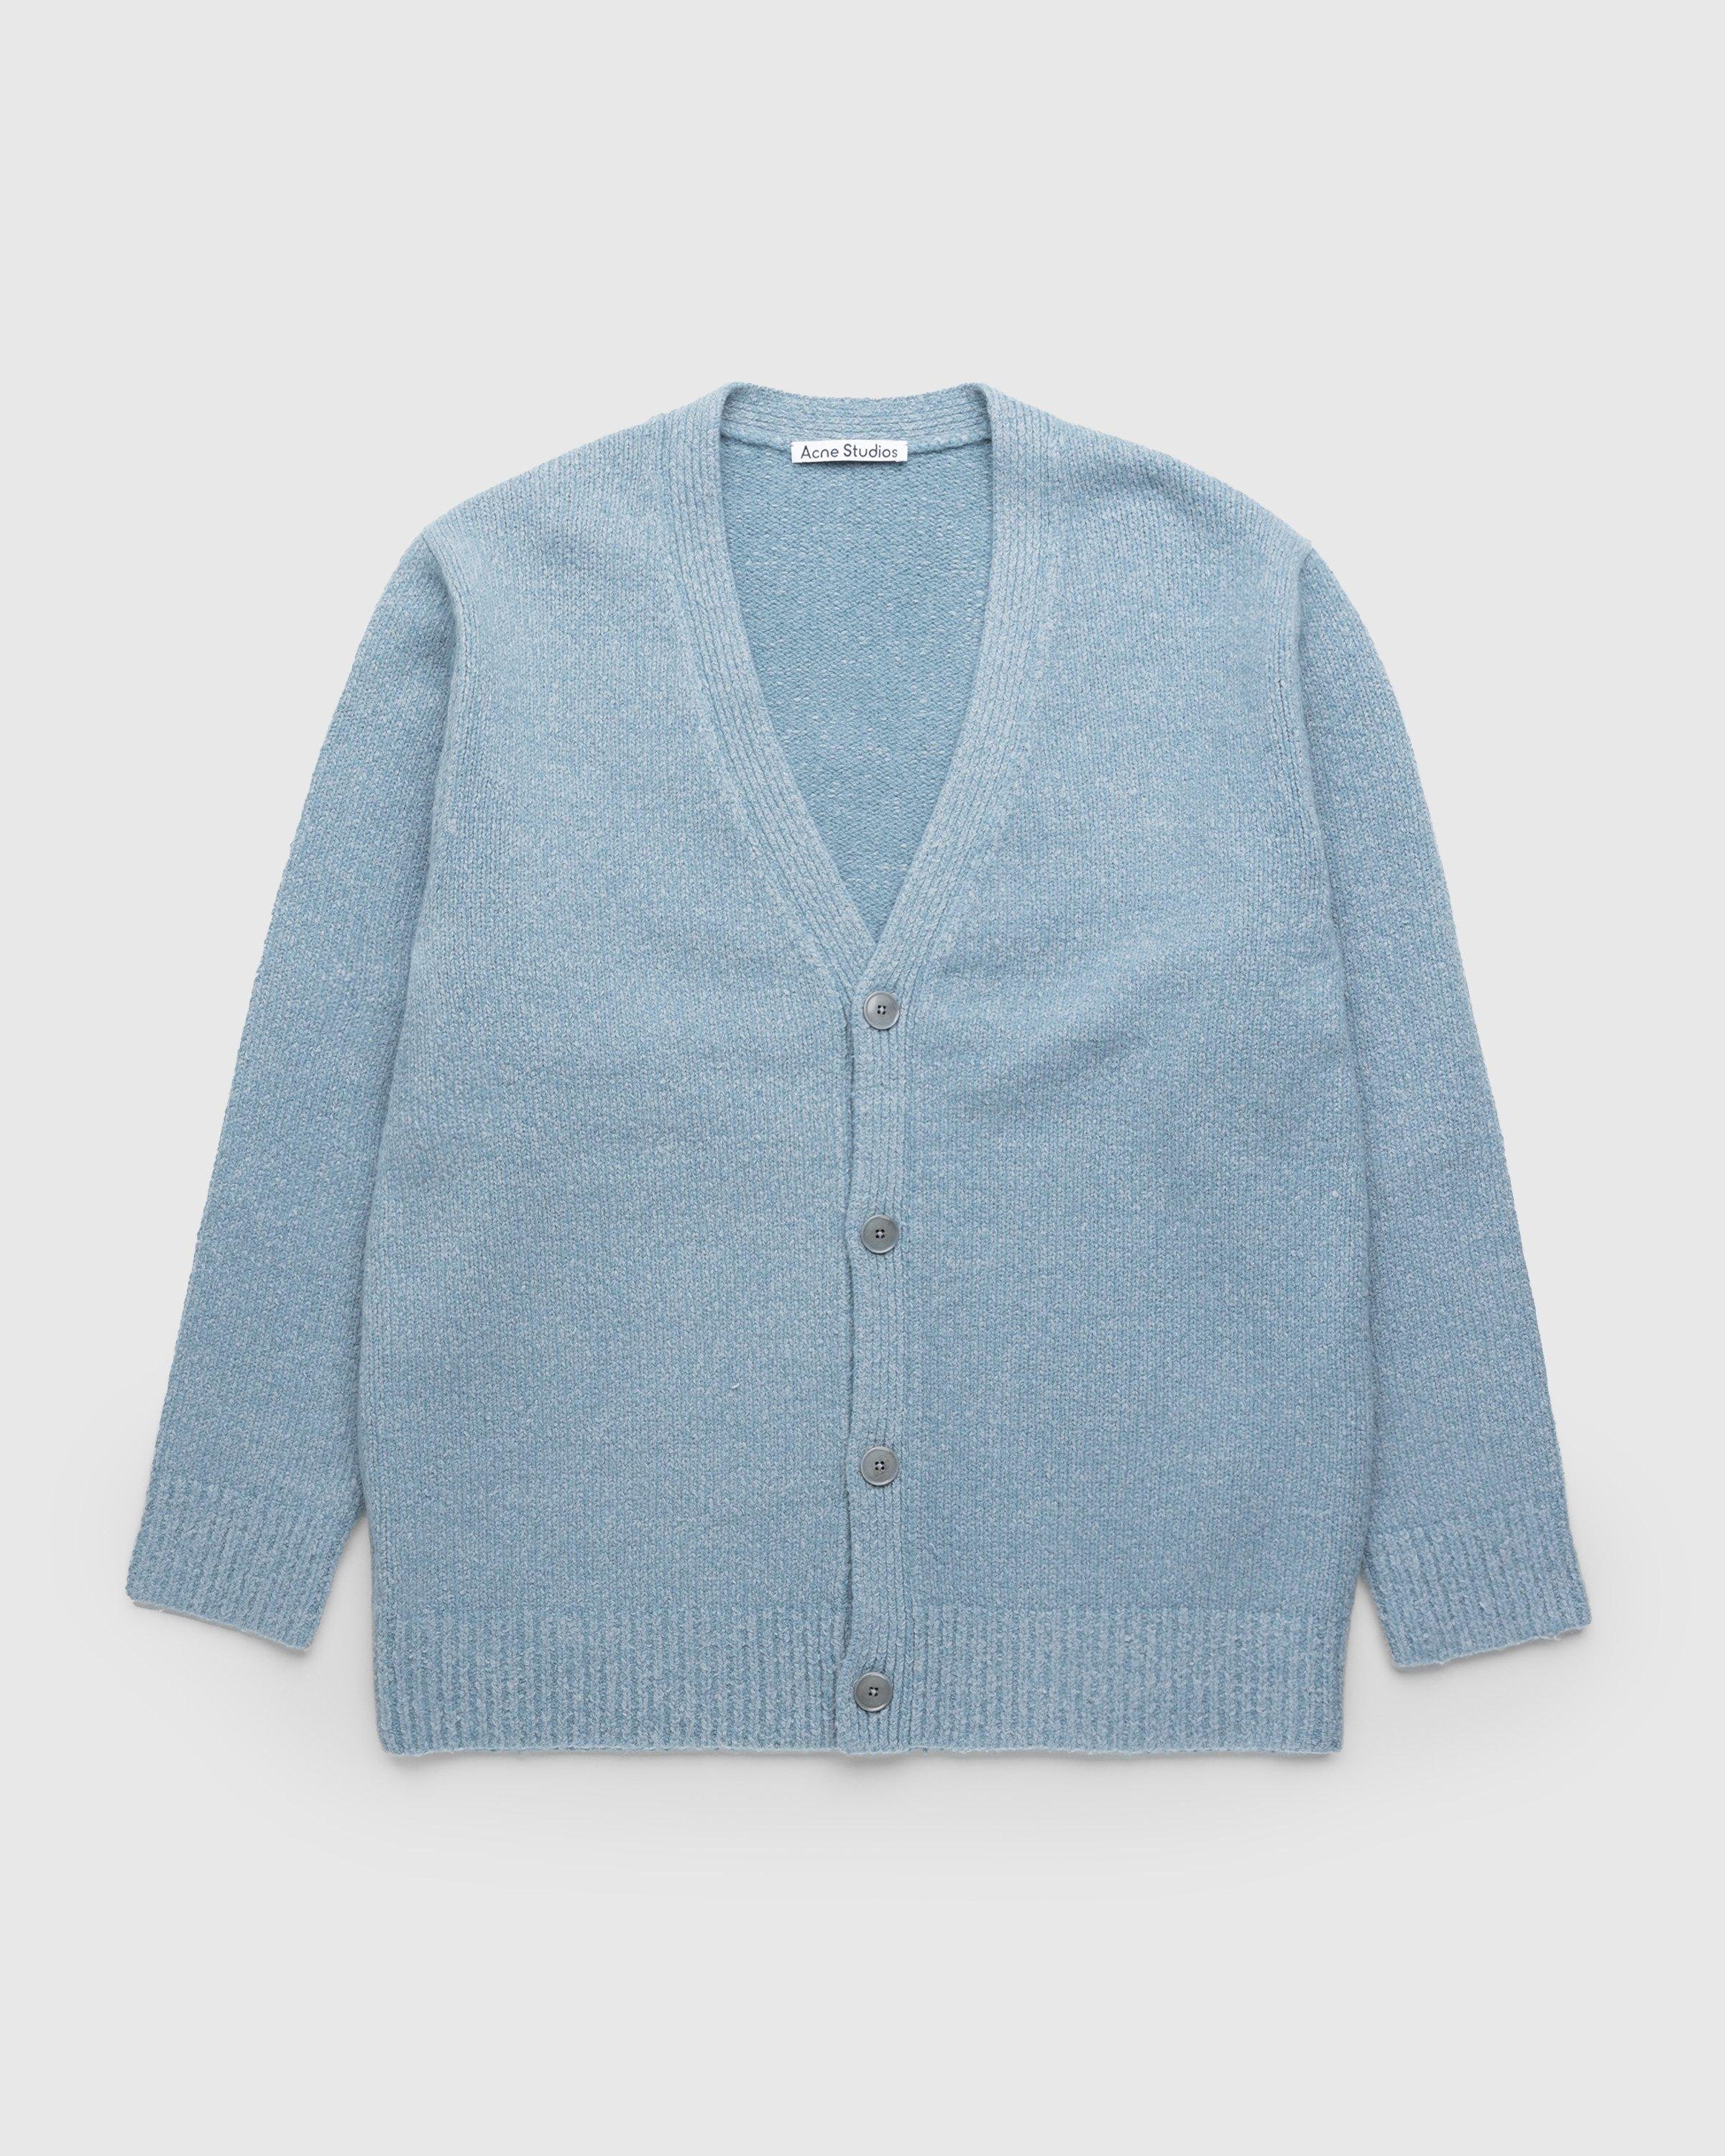 Acne StudiosWool Blend Cardigan Mineral Blue by HIGHSNOBIETY